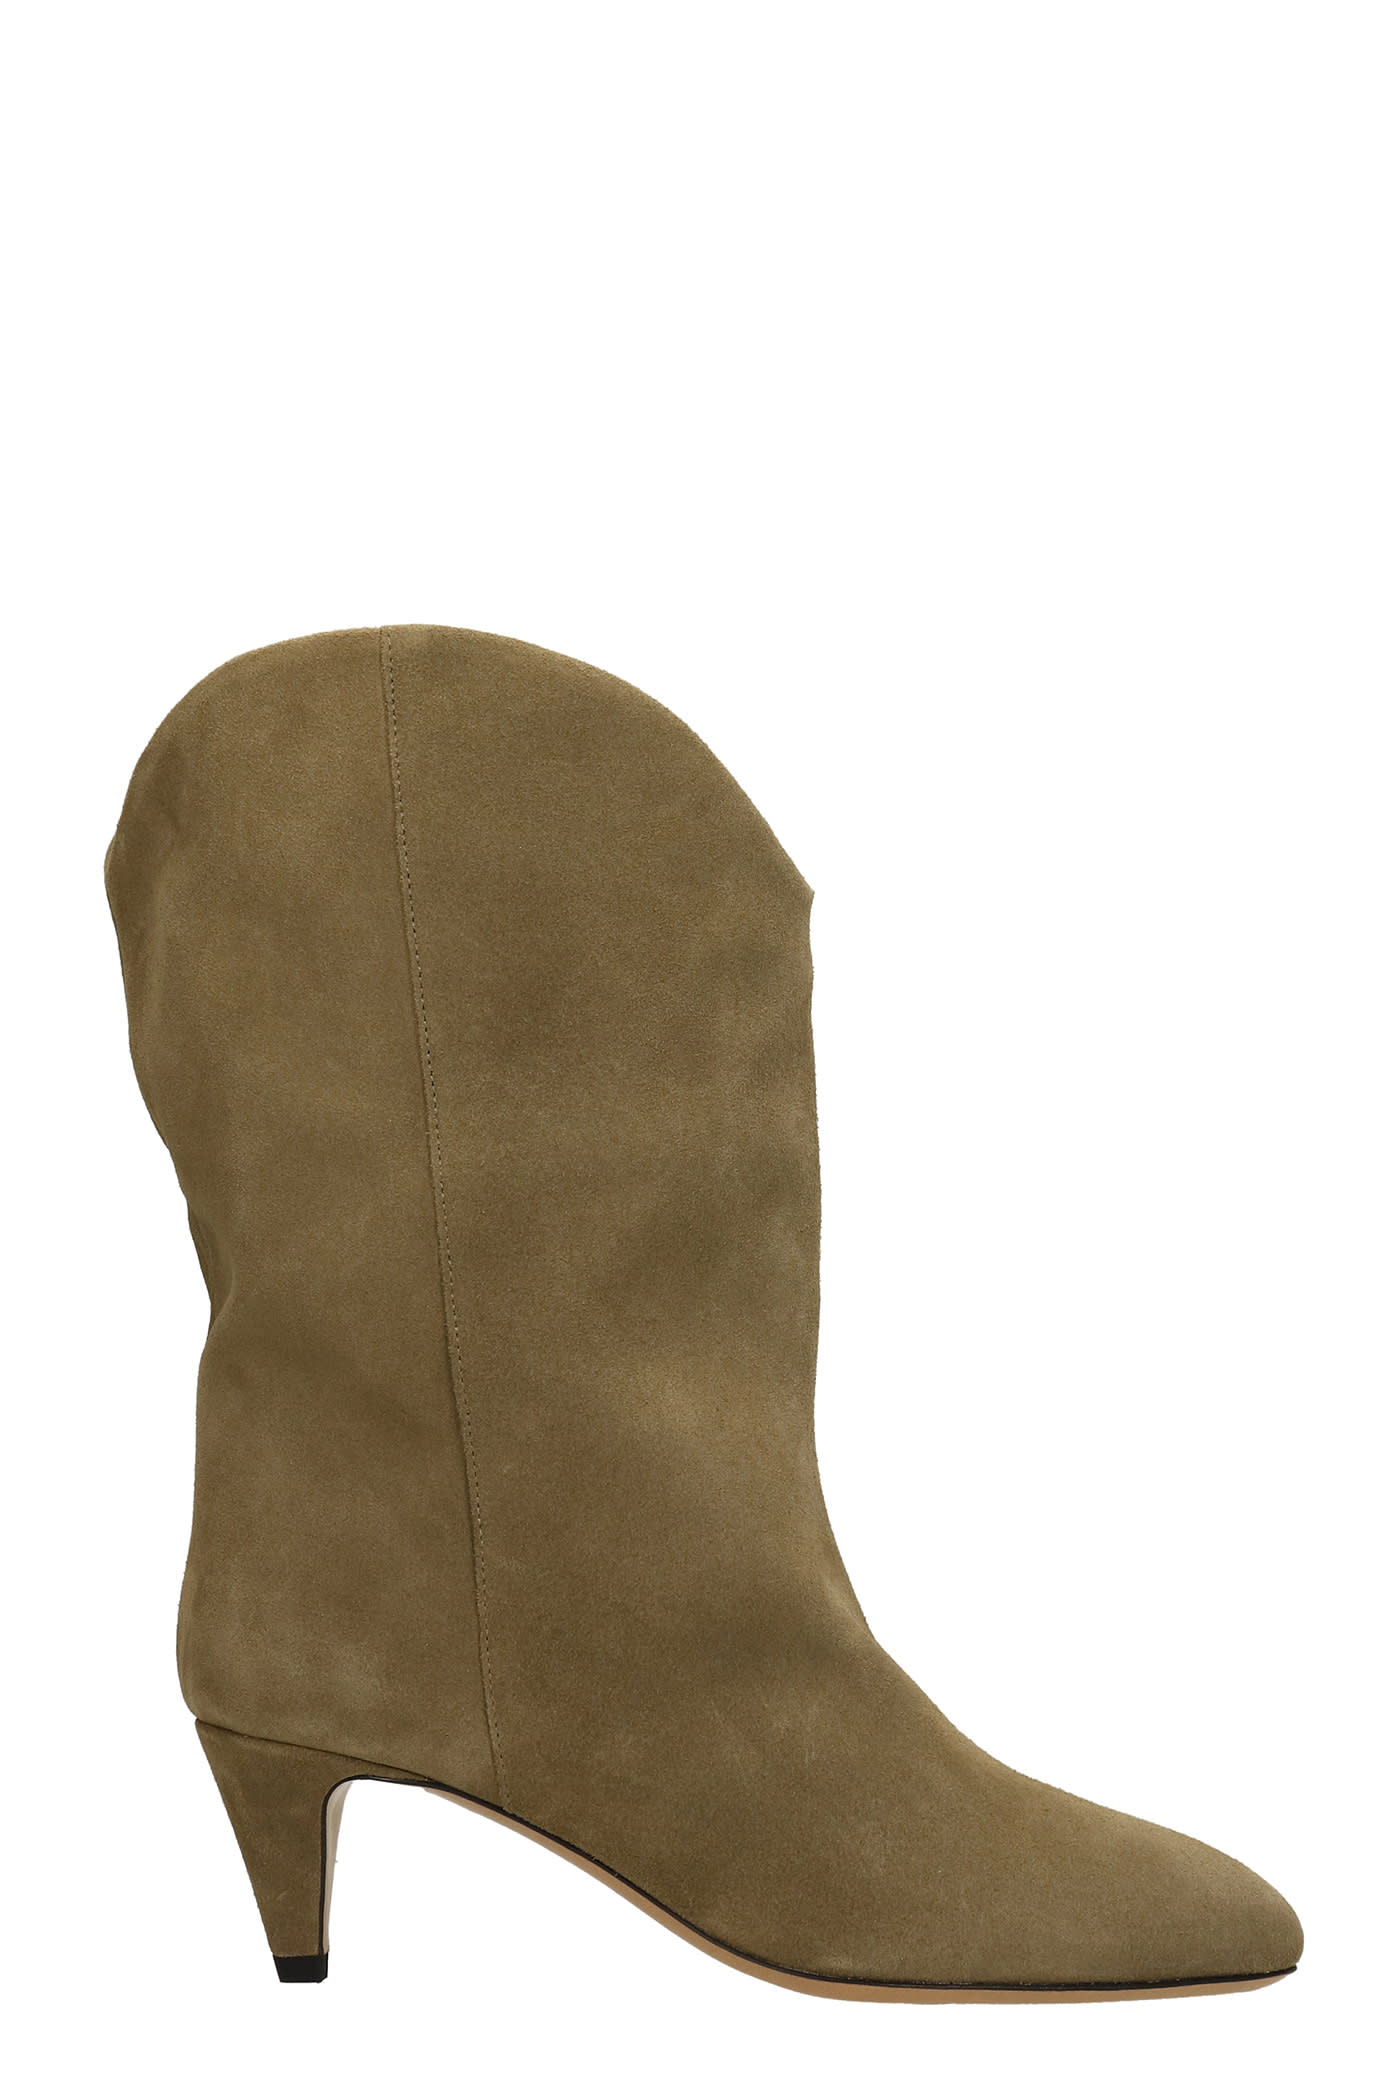 Isabel Marant Dernee High Heels Ankle Boots In Taupe Suede